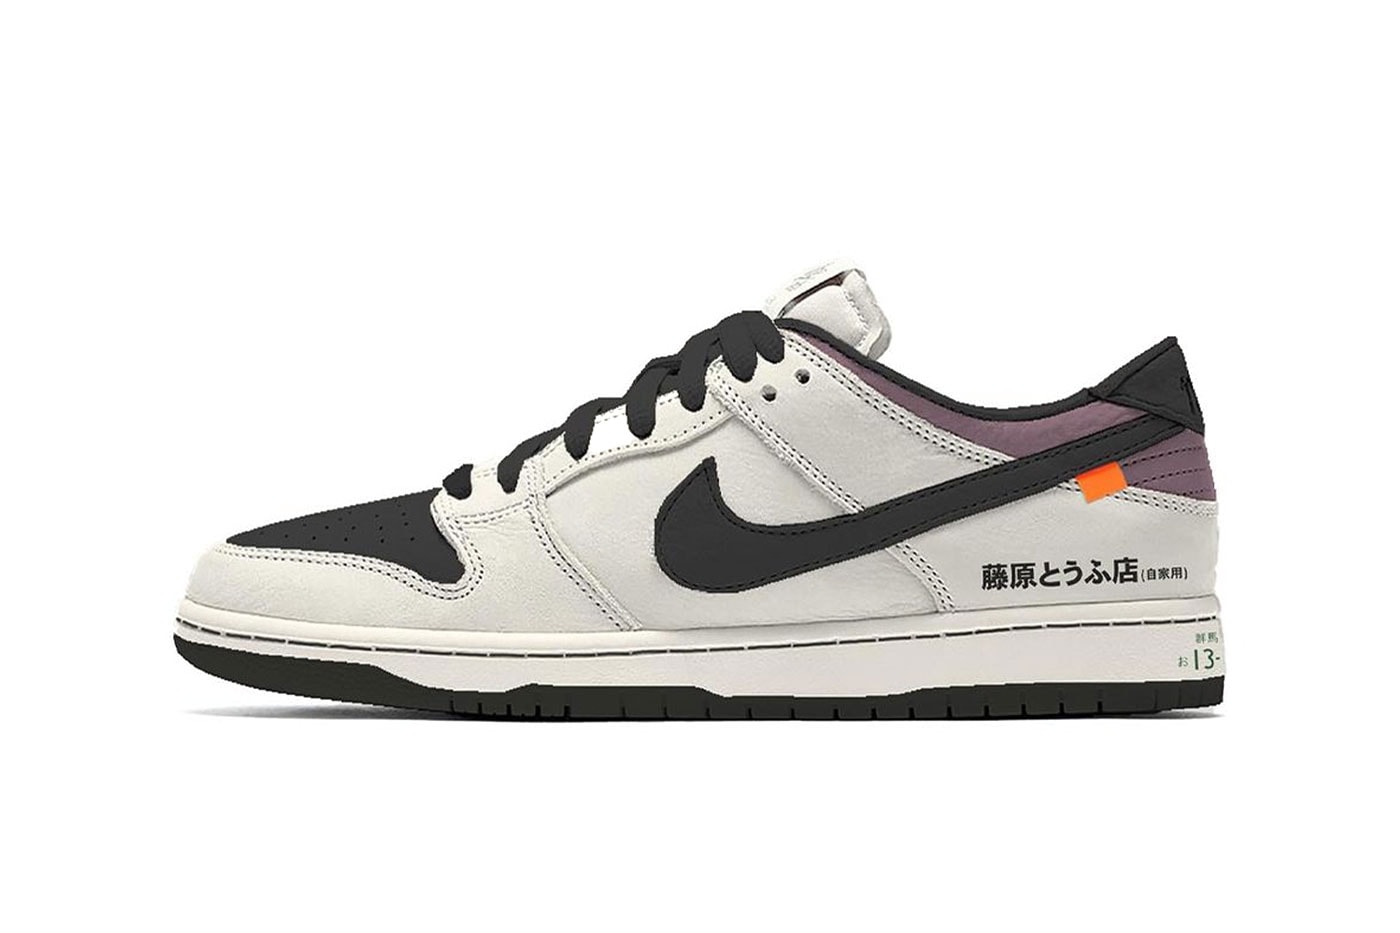 no-brainer Designs an AE86 Dunk Low Concept Initial D